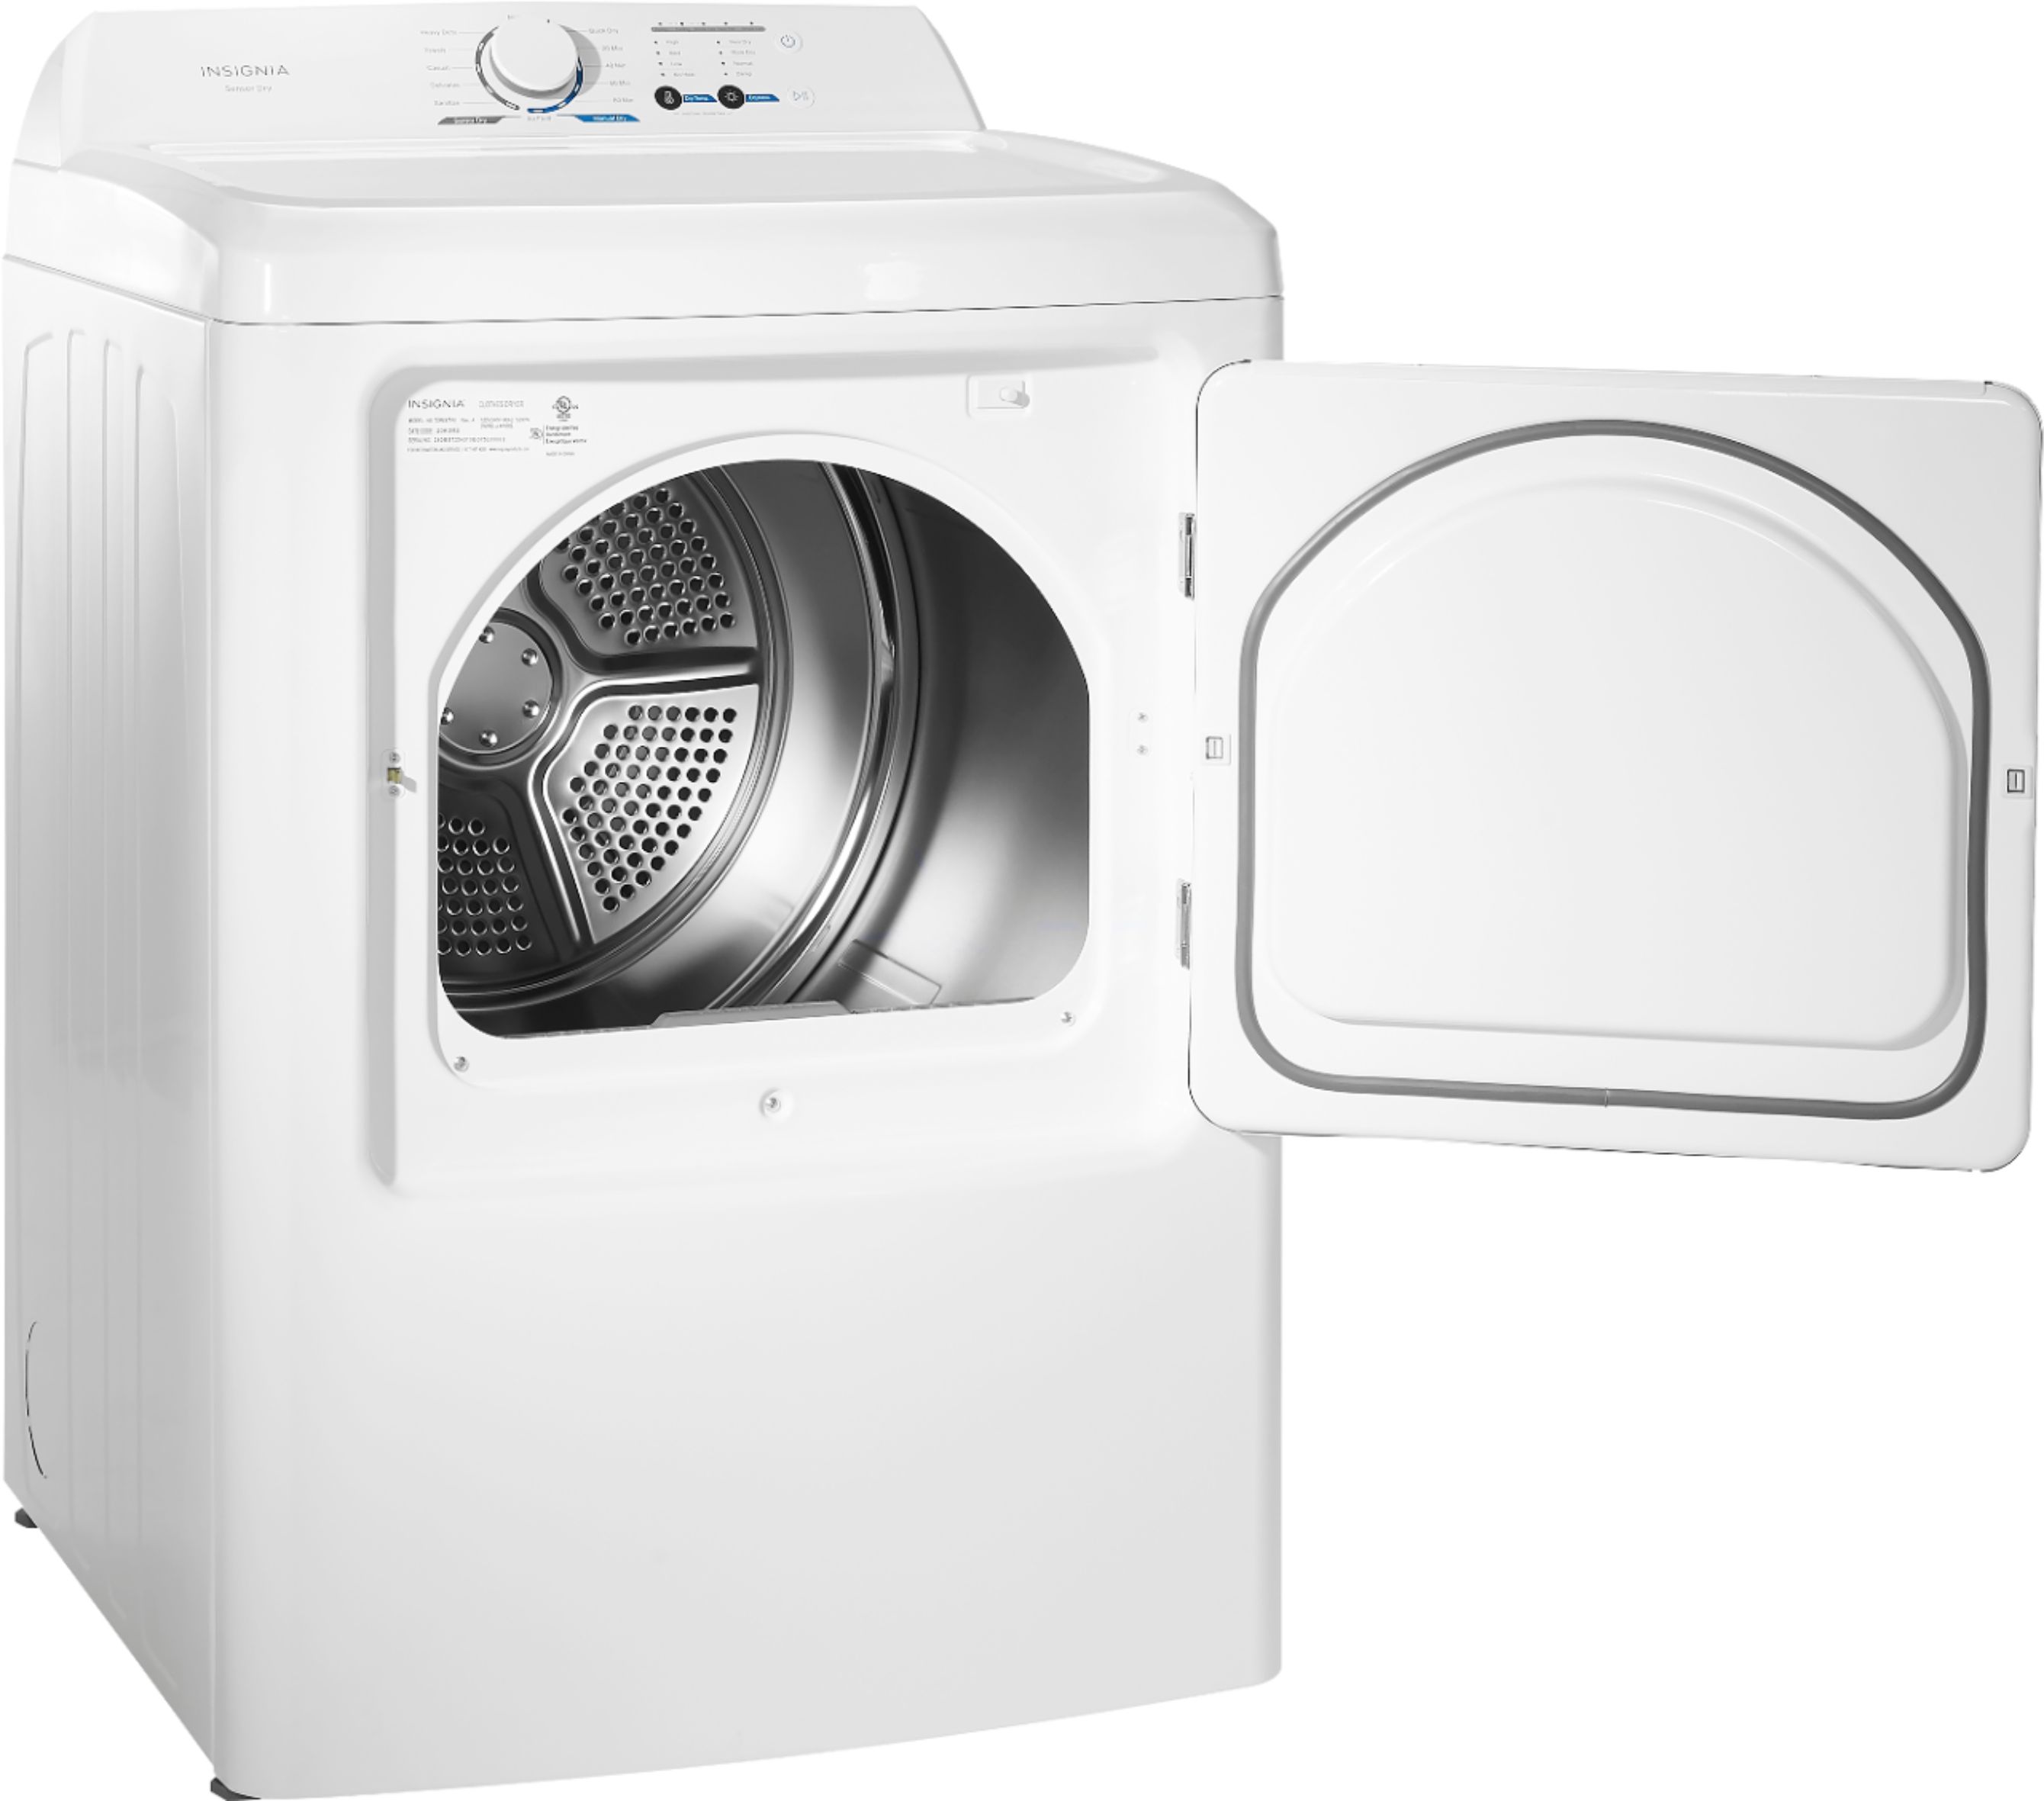 1.41 cu. ft. 120 Volt White Stackable Electric Dryer with Vente & 5 Modes  Easy Knob Control, Wall Mount Kit Included N710RA0718005 - The Home Depot